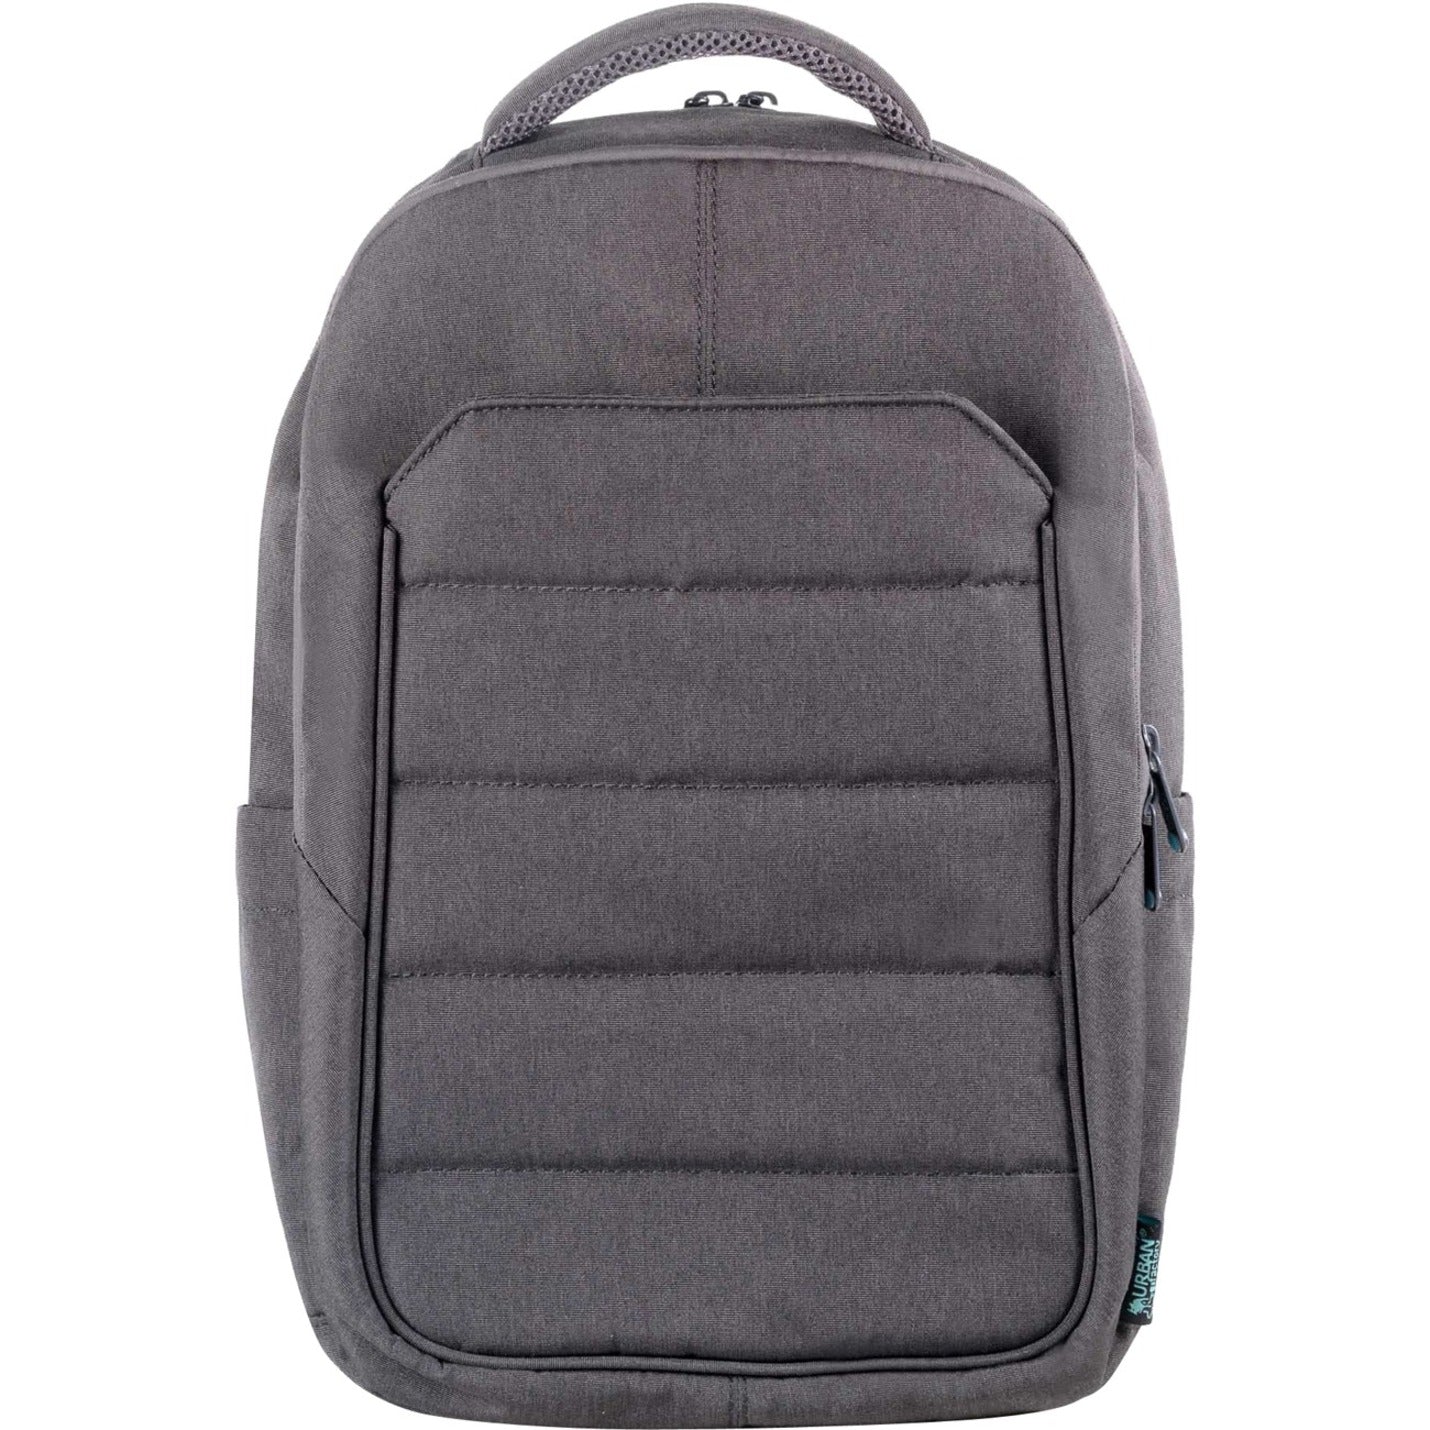 Urban Factory GREENEE Carrying Case (Backpack) for 13" to 15.6" Notebook - Gray Green